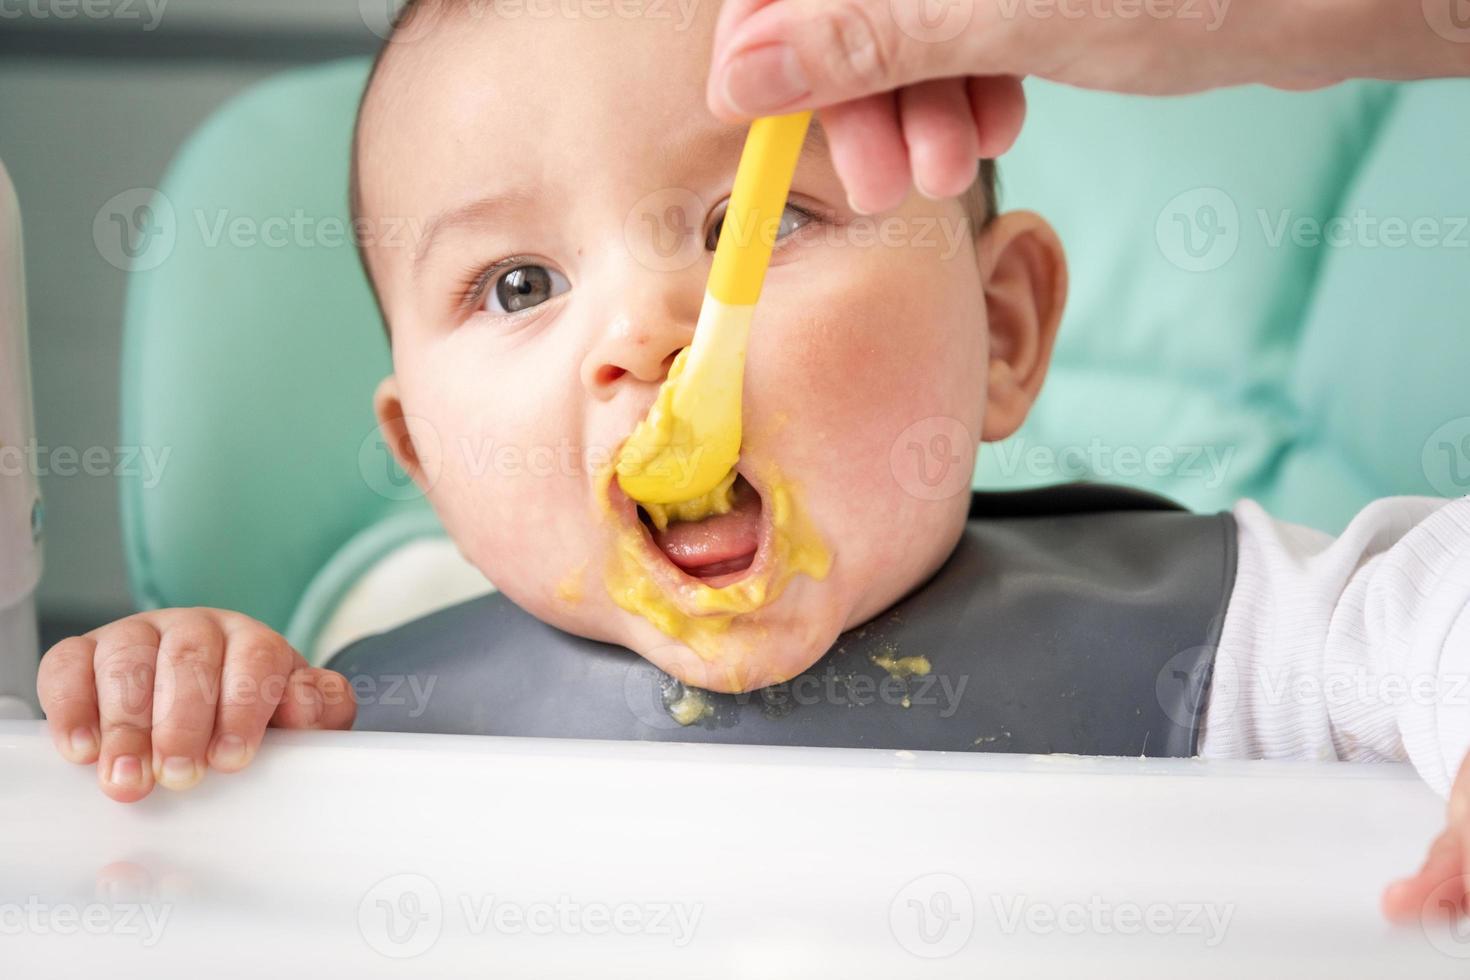 Mom feeds the baby with a spoon of vegetable puree at the children's feeding table. Baby's appetite, healthy nutrition, introduction of complementary foods. Copyspace, mock up photo